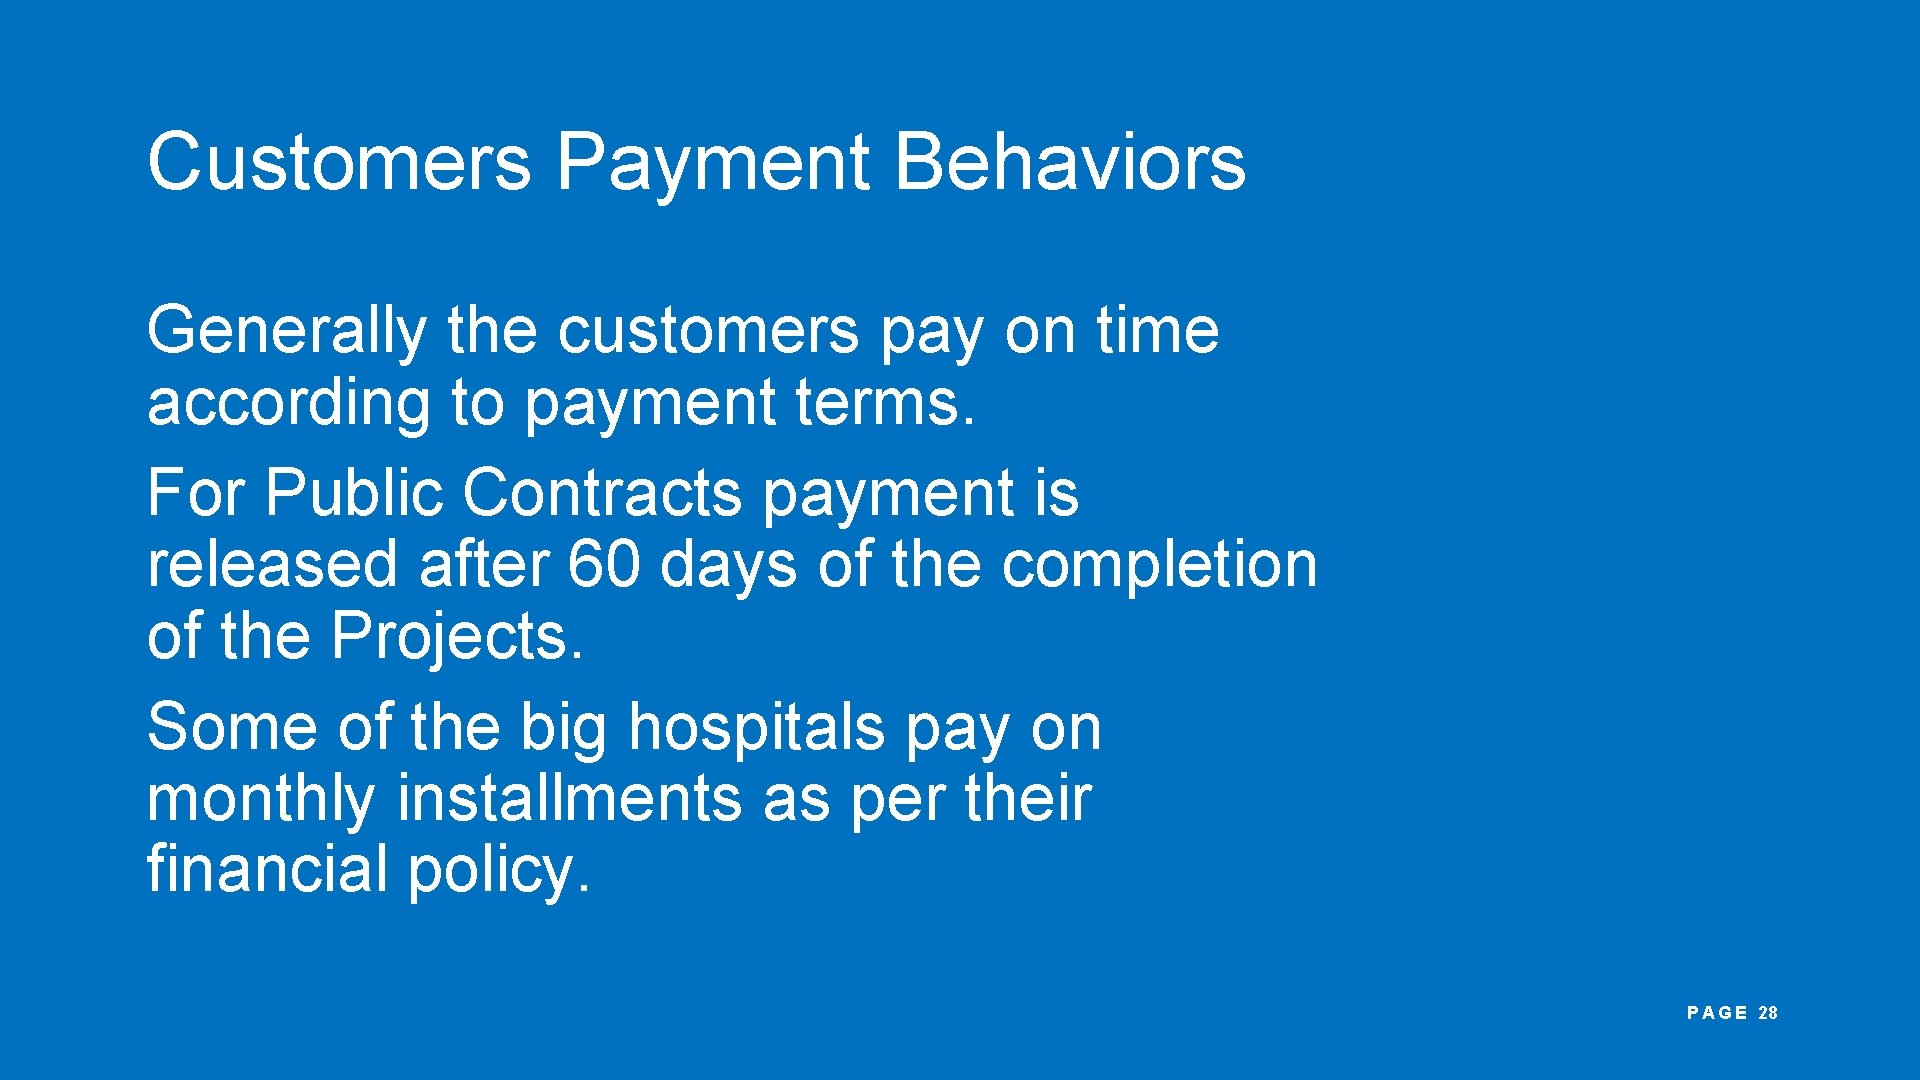 Customers Payment Behaviors Generally the customers pay on time according to payment terms. For